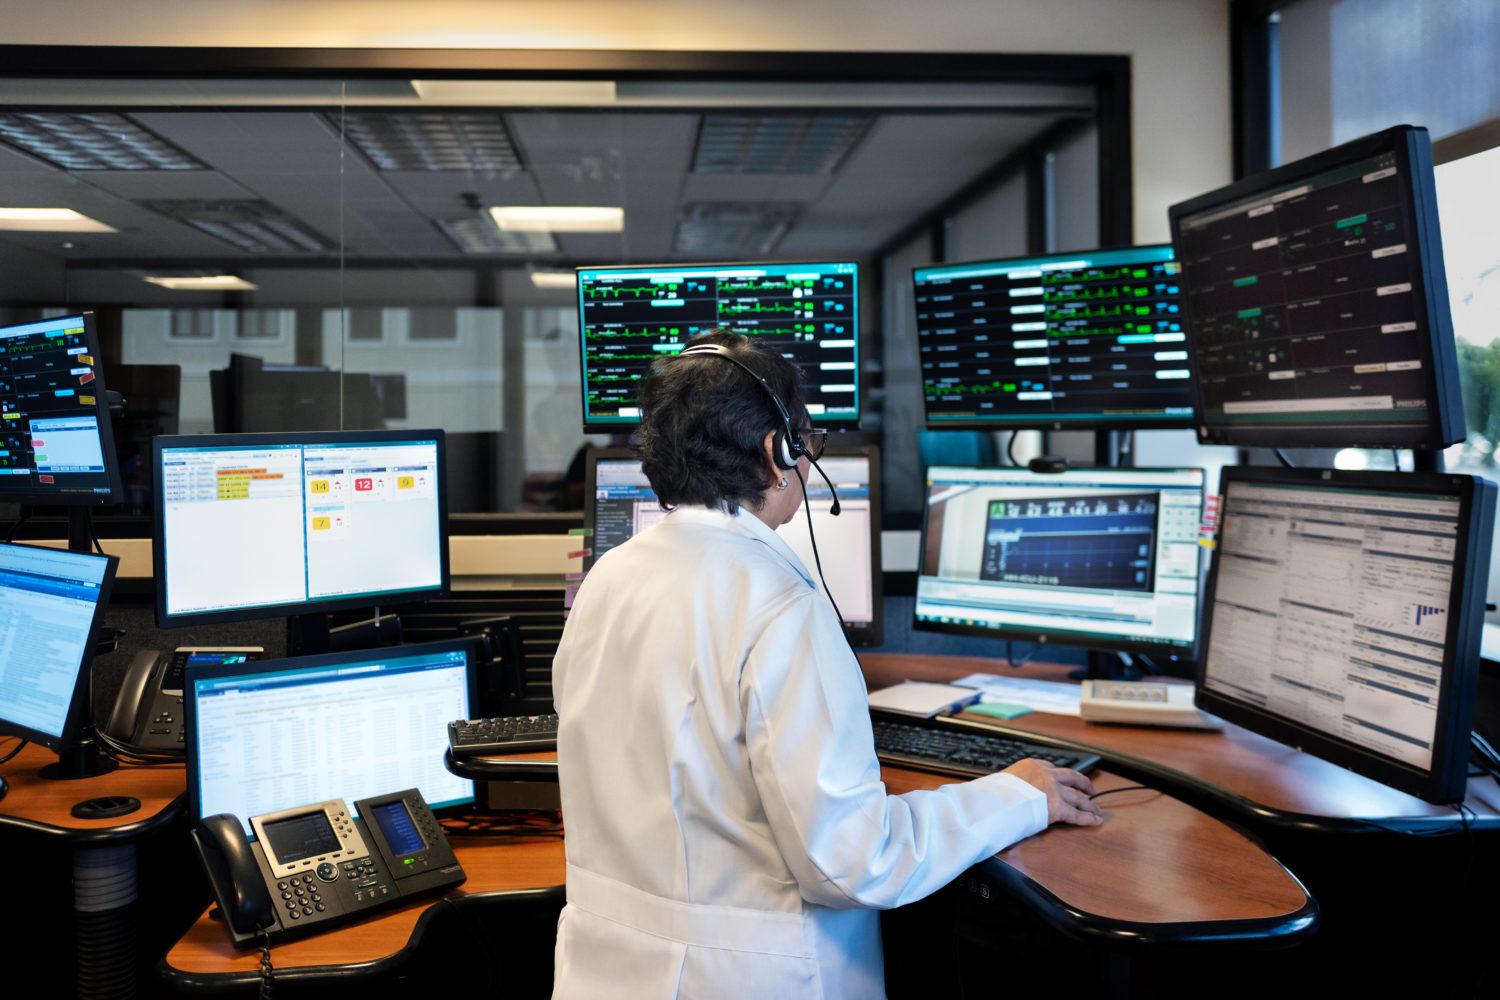 VA, Philips to Create World’s Largest Tele-Critical Care System for Veterans